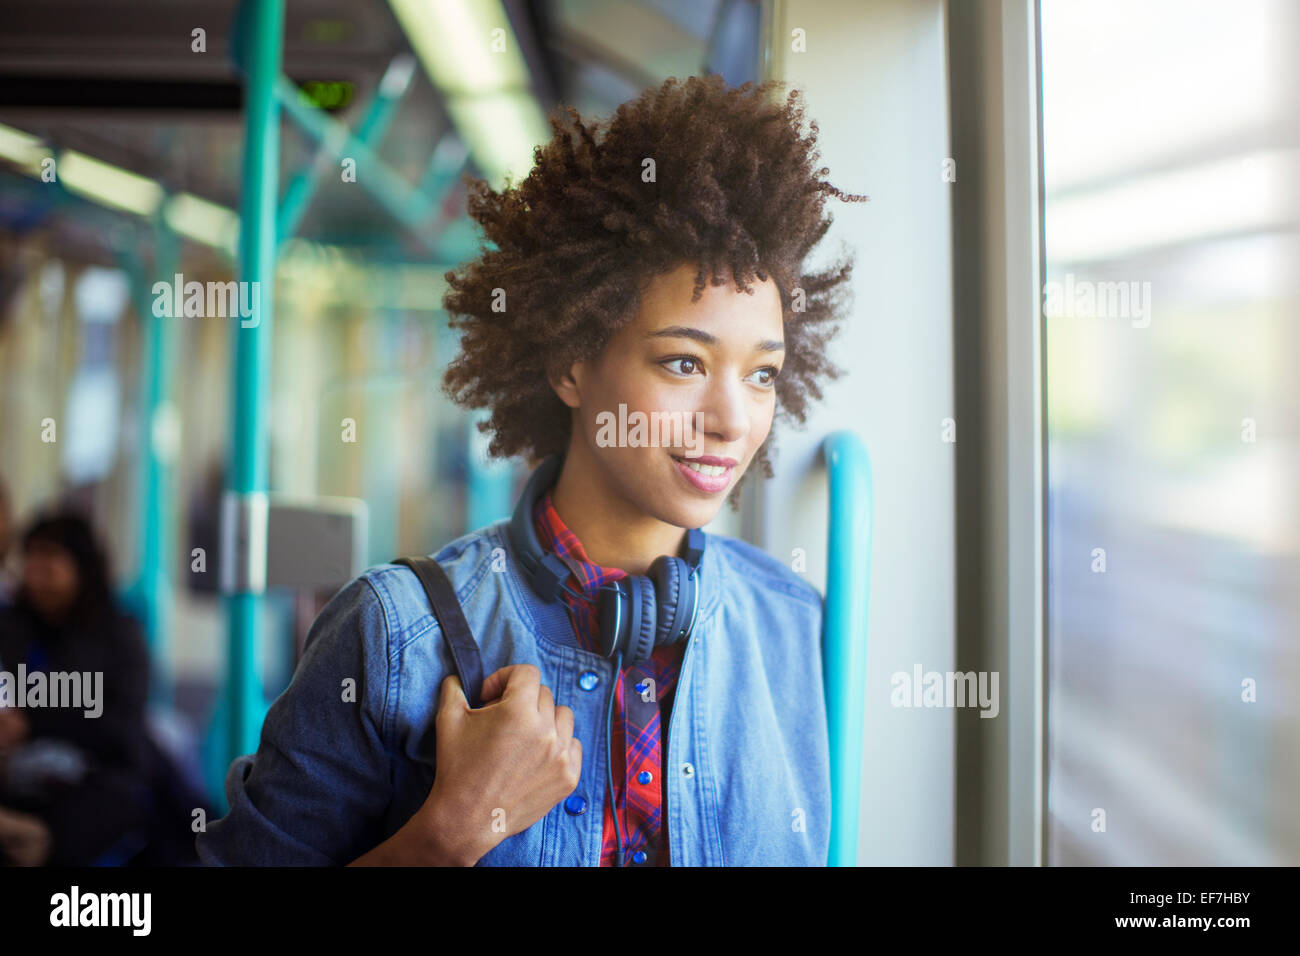 Woman looking out window of train Stock Photo